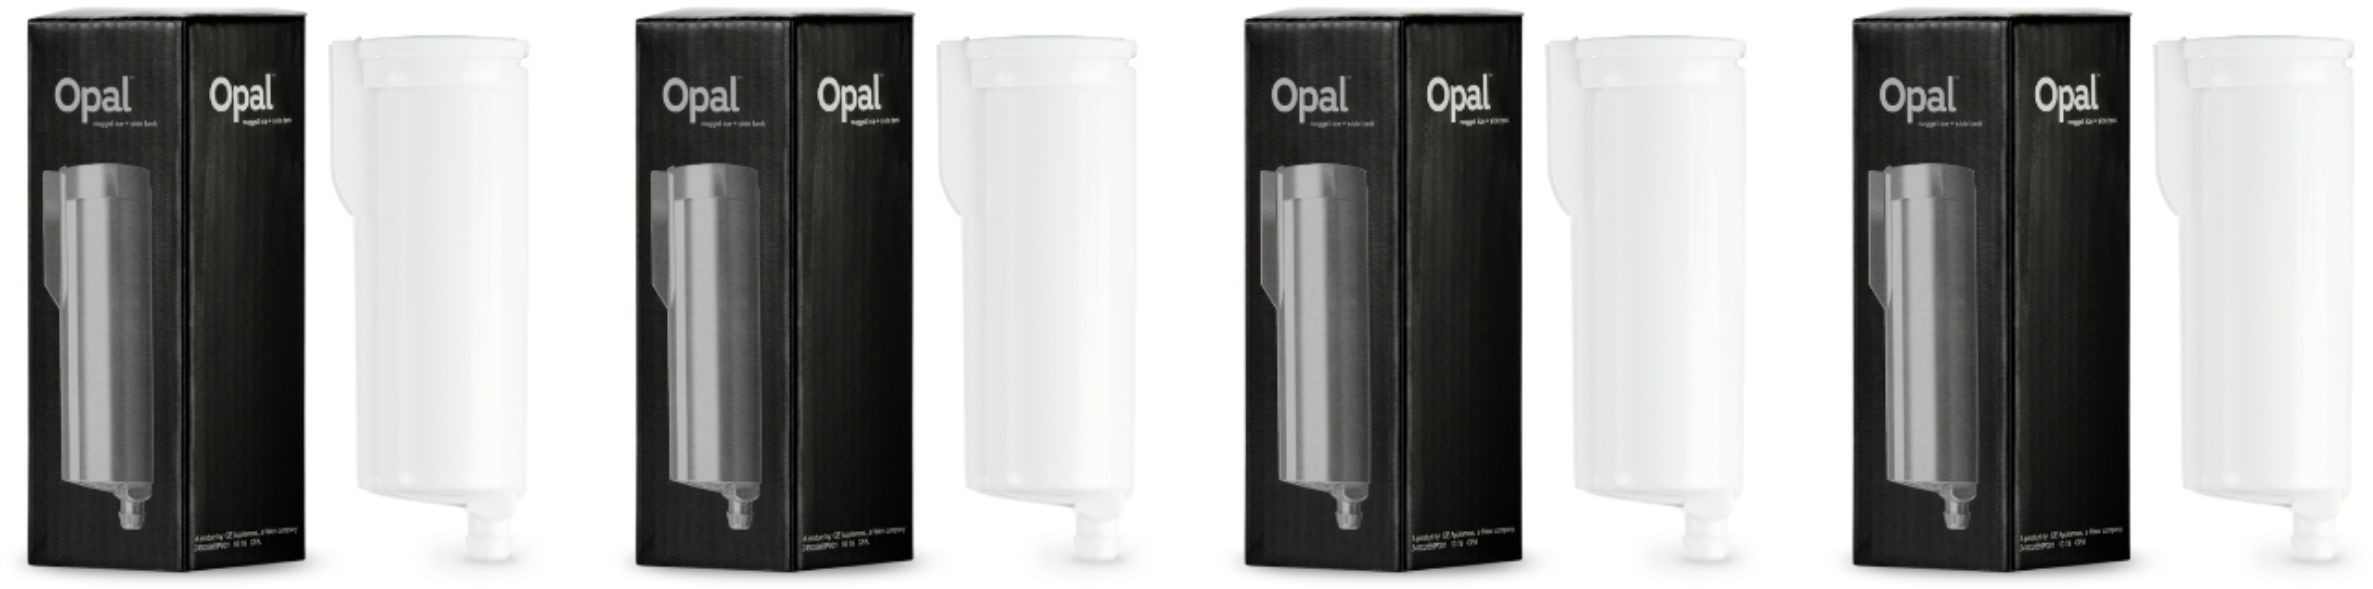 GE Profile Water Filter for Opal 2.0 Nugget Ice Maker White P4INKFILTR -  Best Buy